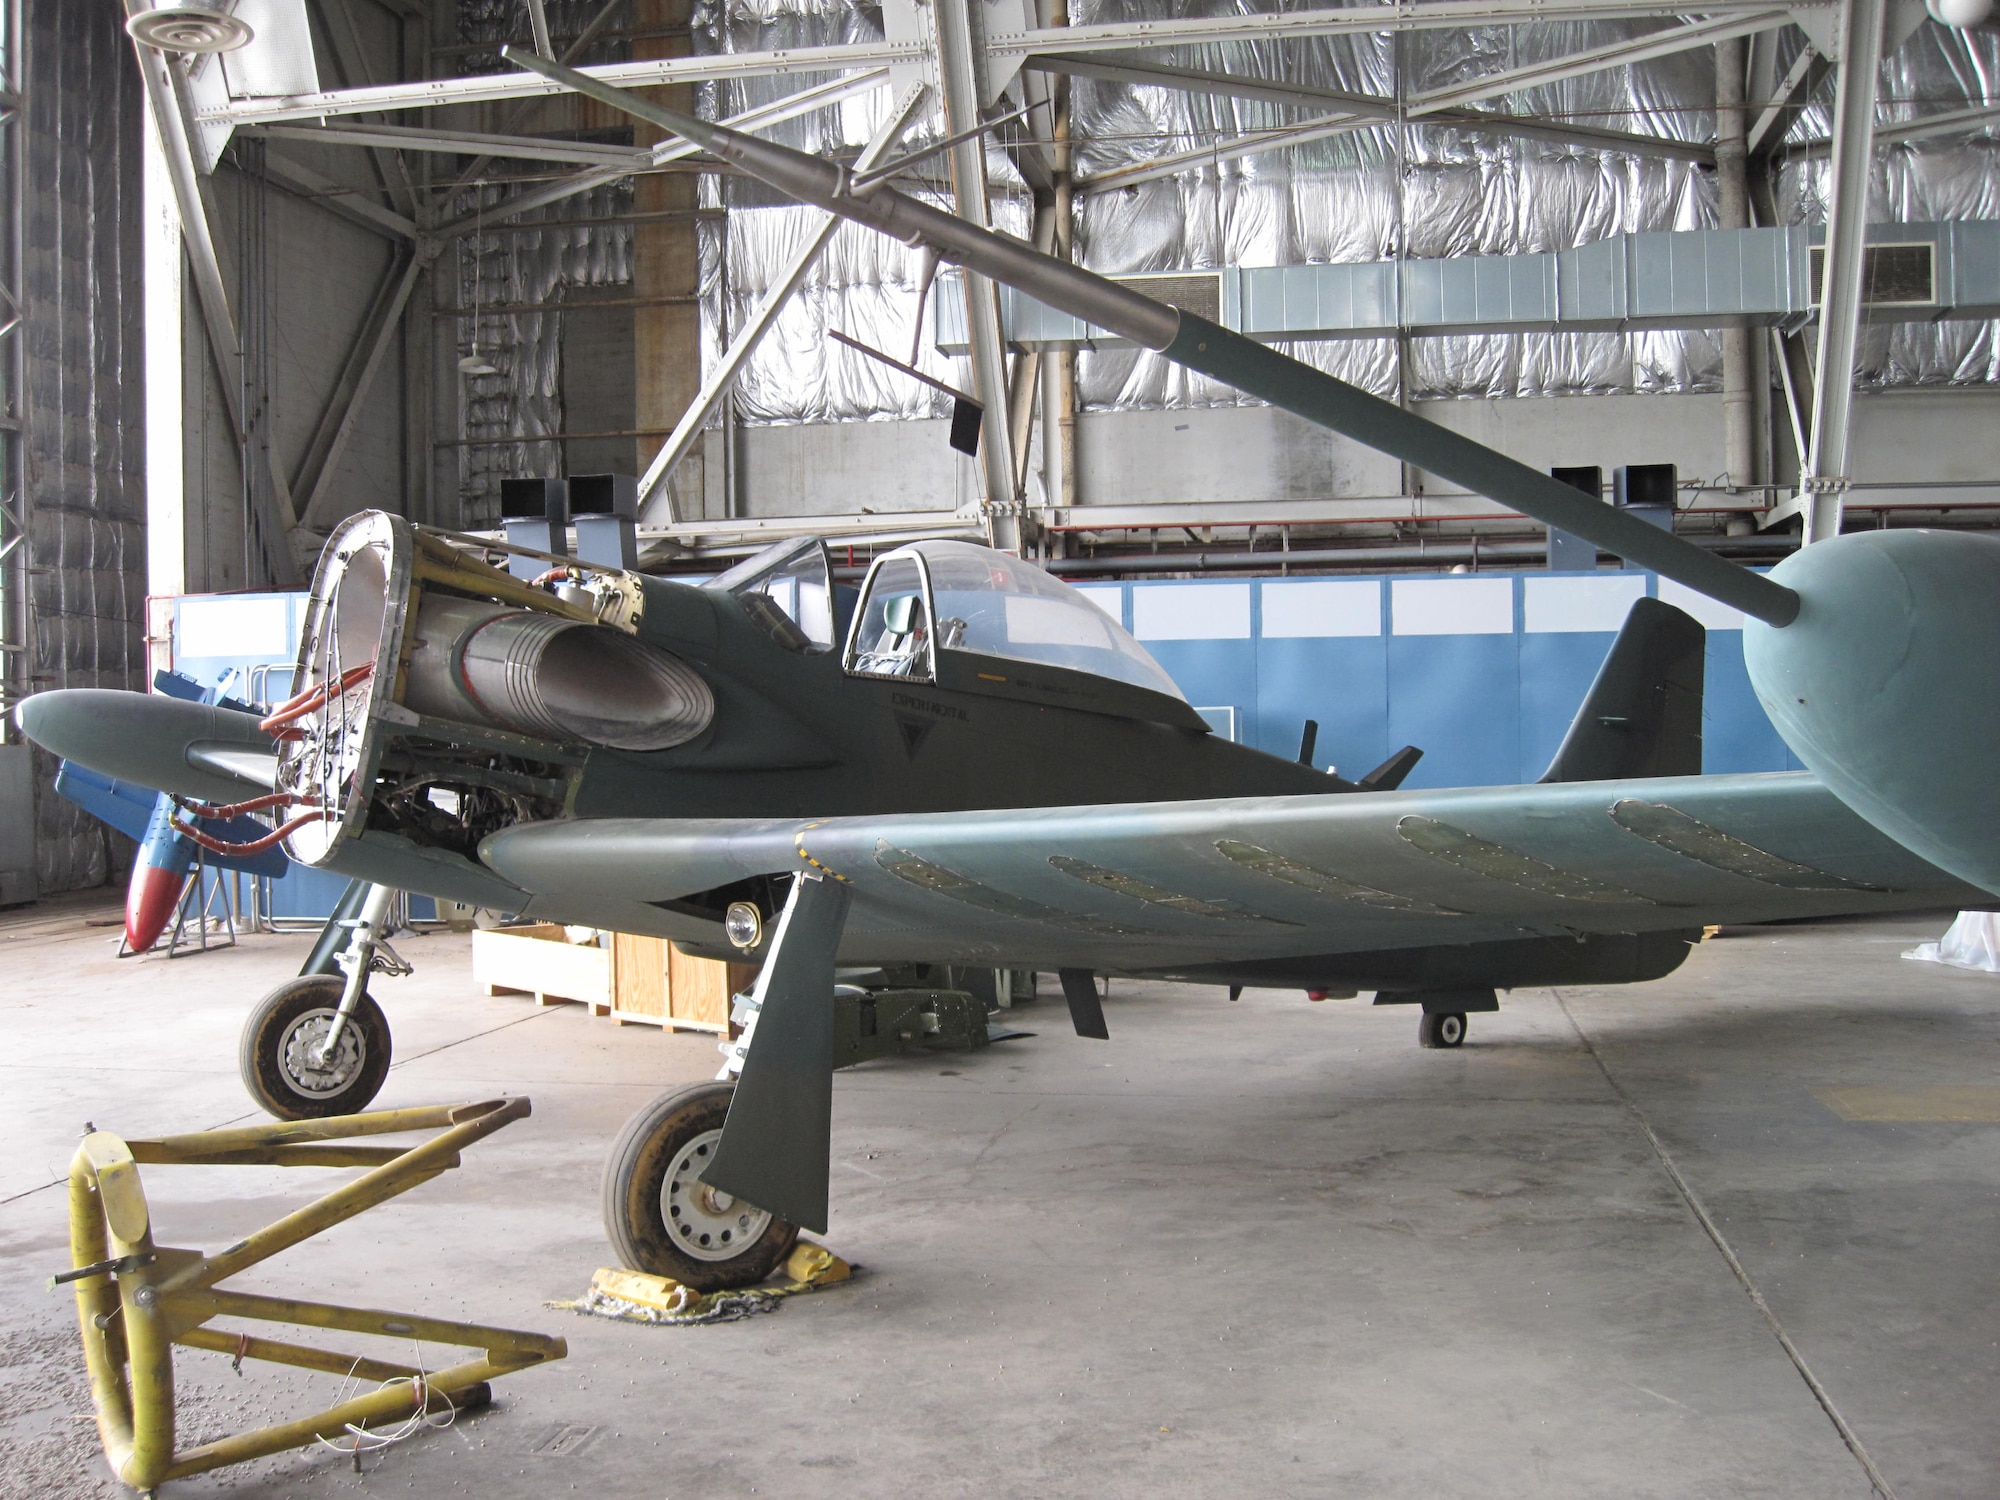 Picture of Piper PA-48E disassembled in storage hangar.